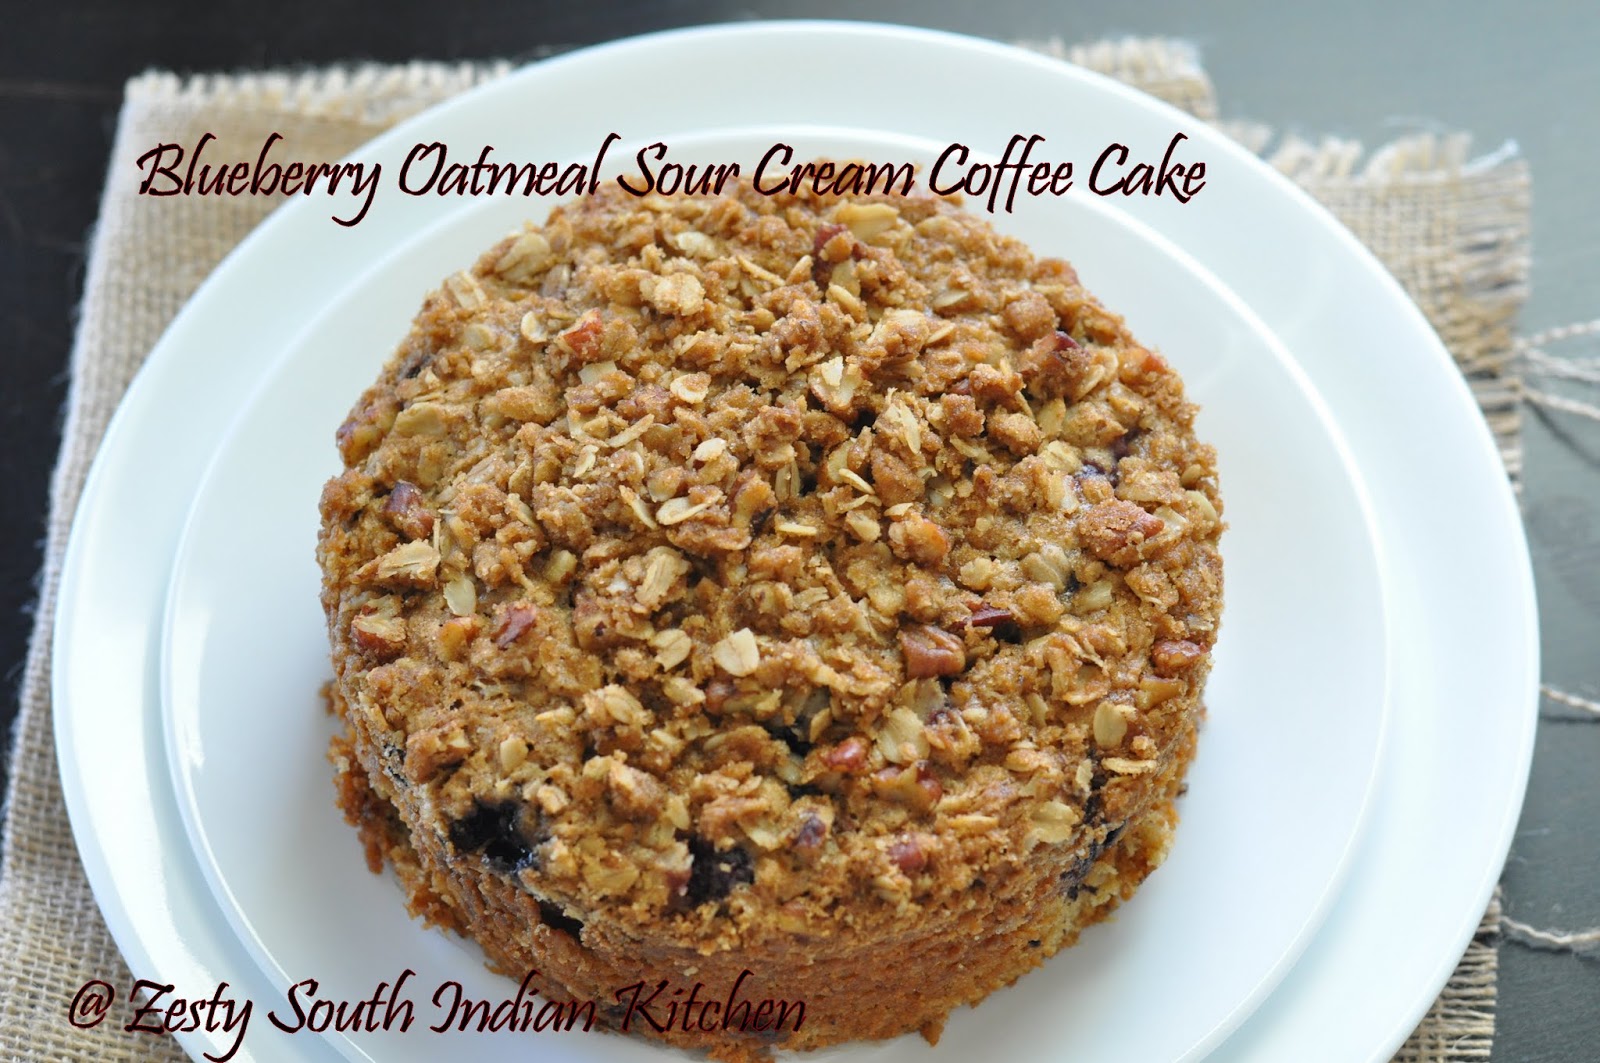 Blueberry Oatmeal Sour cream Coffee Cake with Oats Pecan streusel picture picture